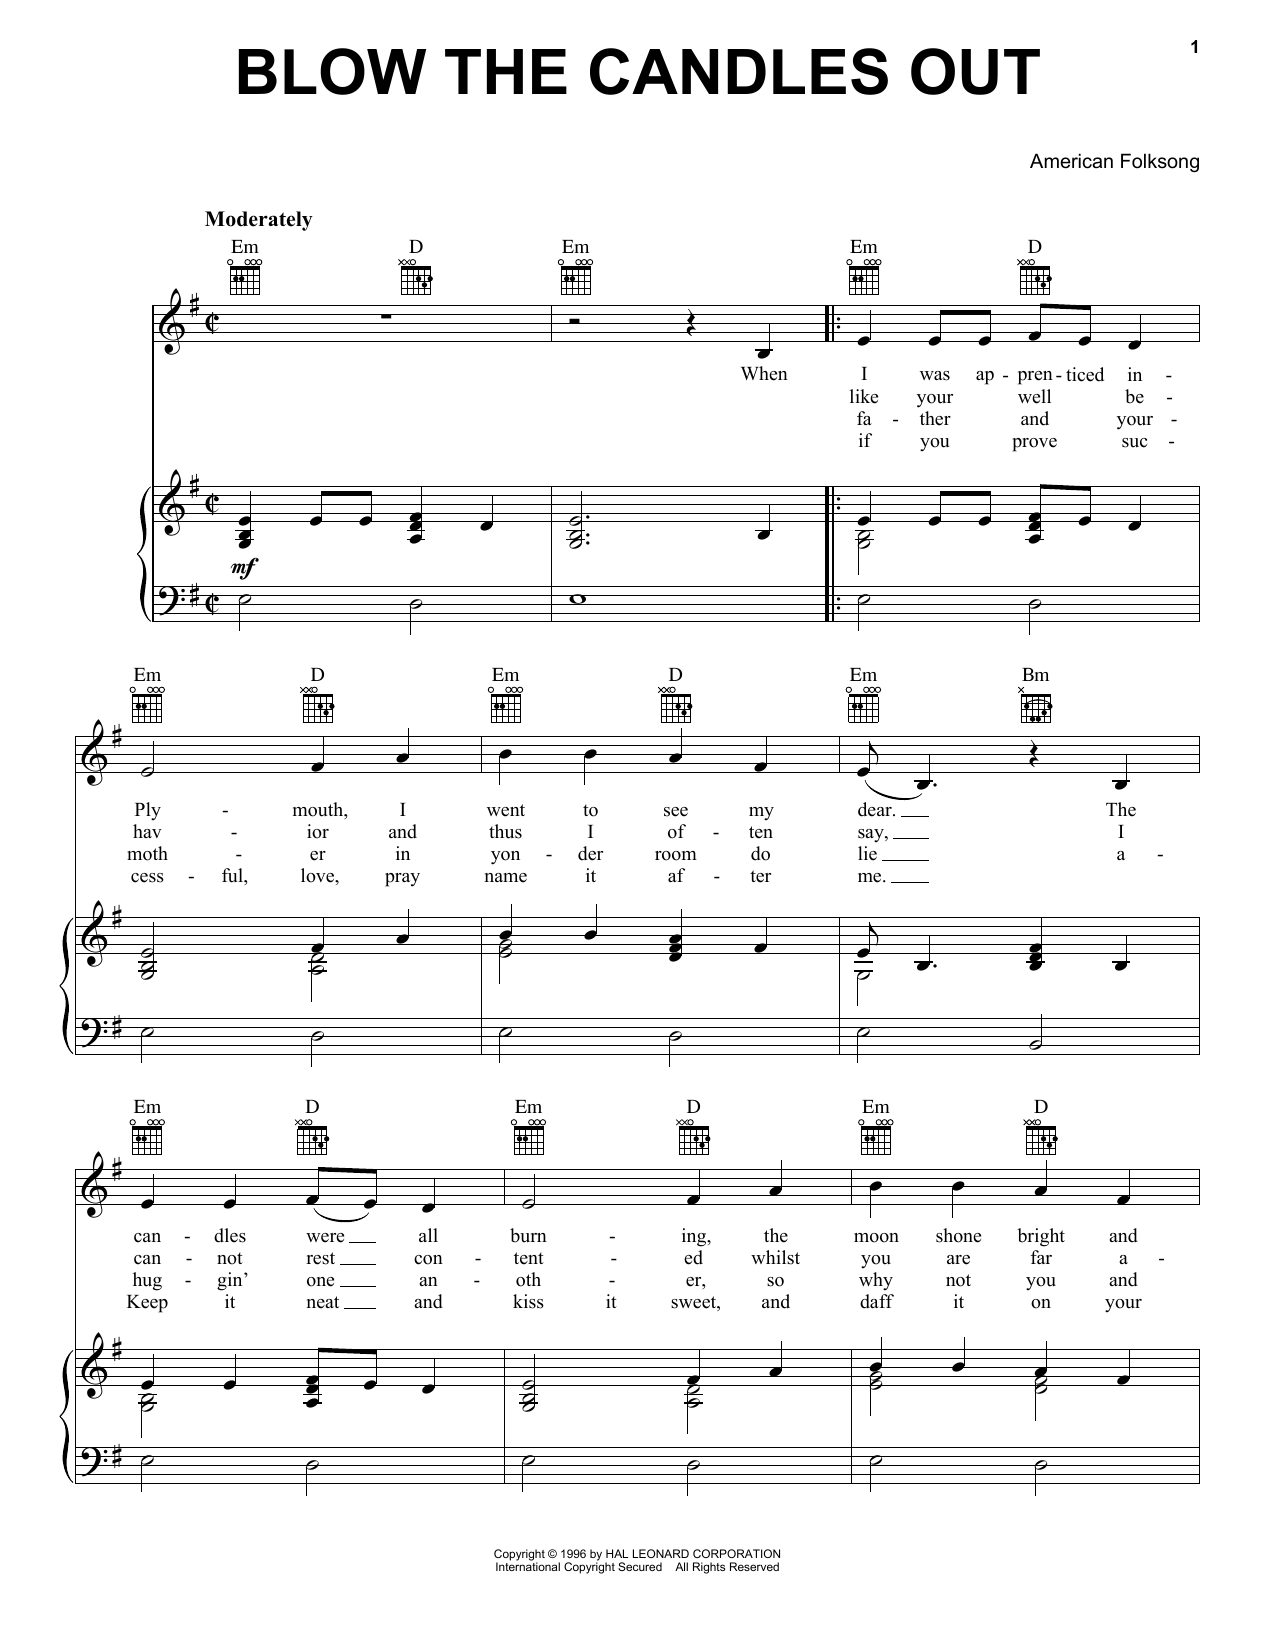 Download American Folksong Blow The Candles Out Sheet Music